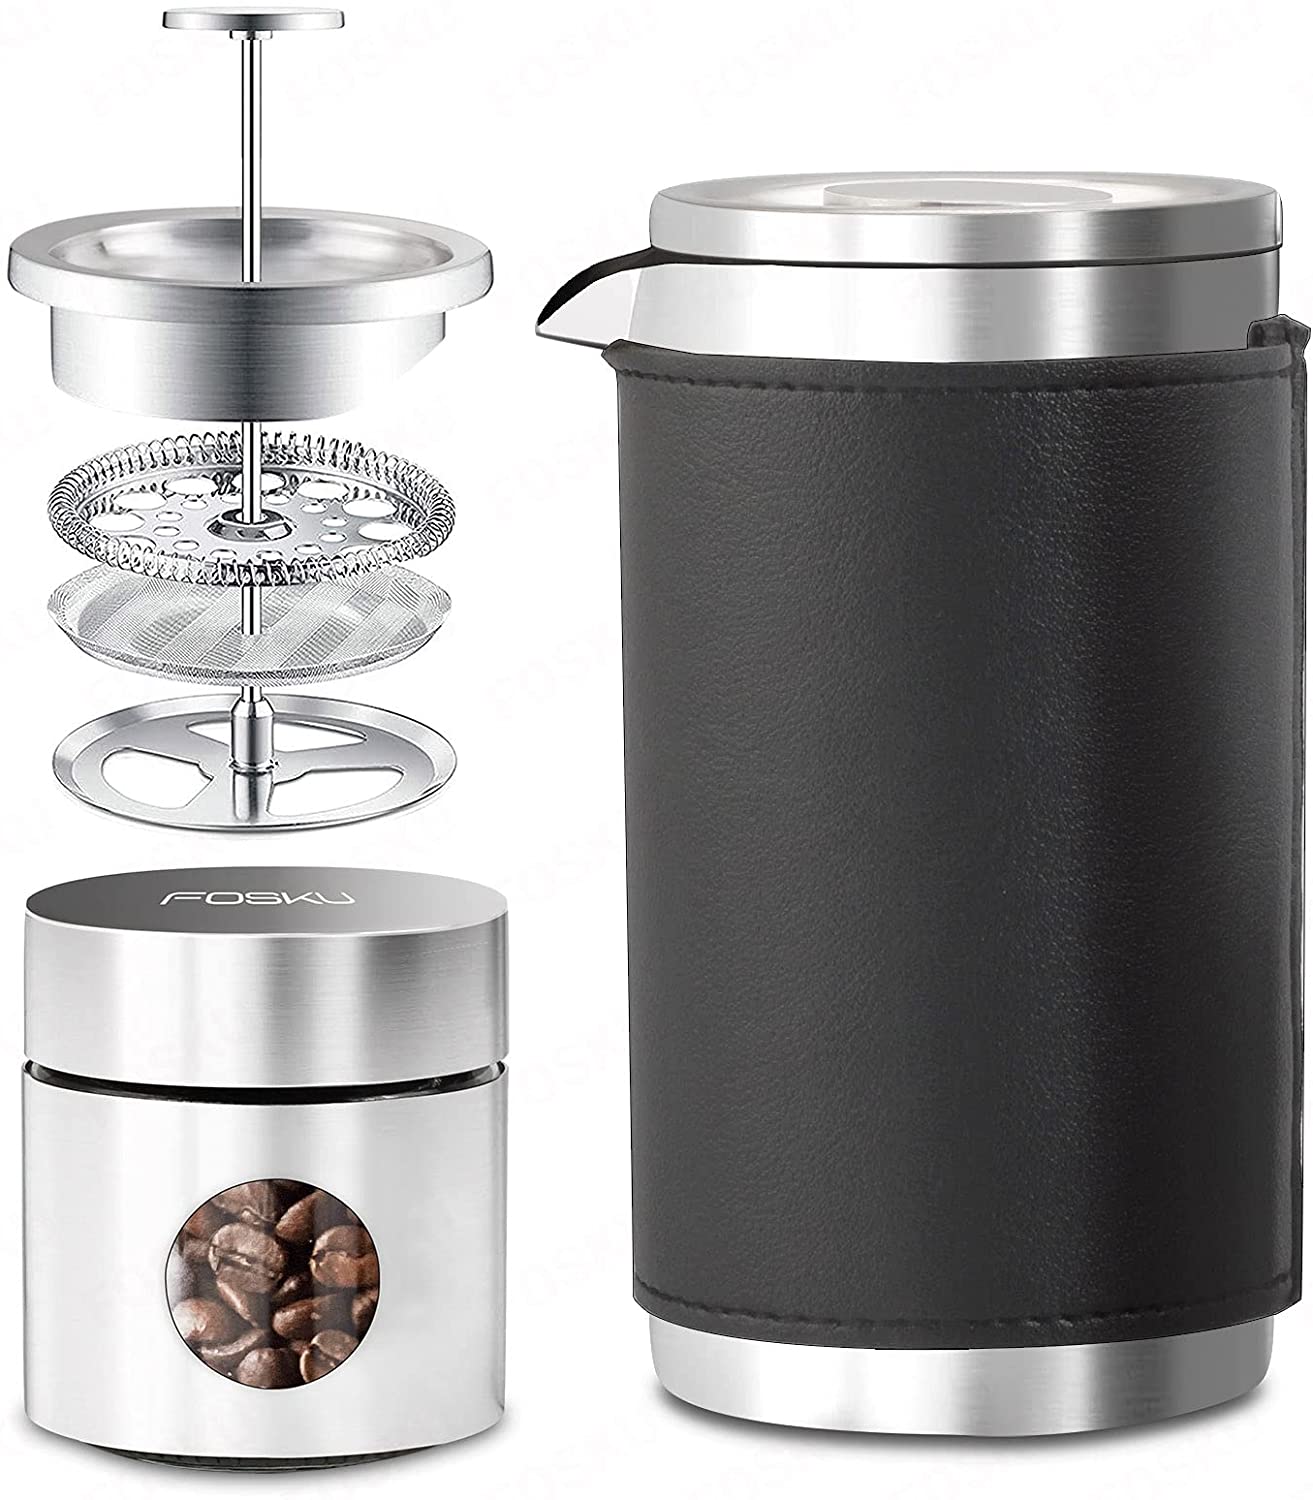 FOSKU French Press Coffee Maker Set, Stainless Steel Camping Coffee Maker and Coffee Tin with Travel Bag, 1 or 2 Cups, Small French Press Double-Walled 350 ml, Dishwasher Safe